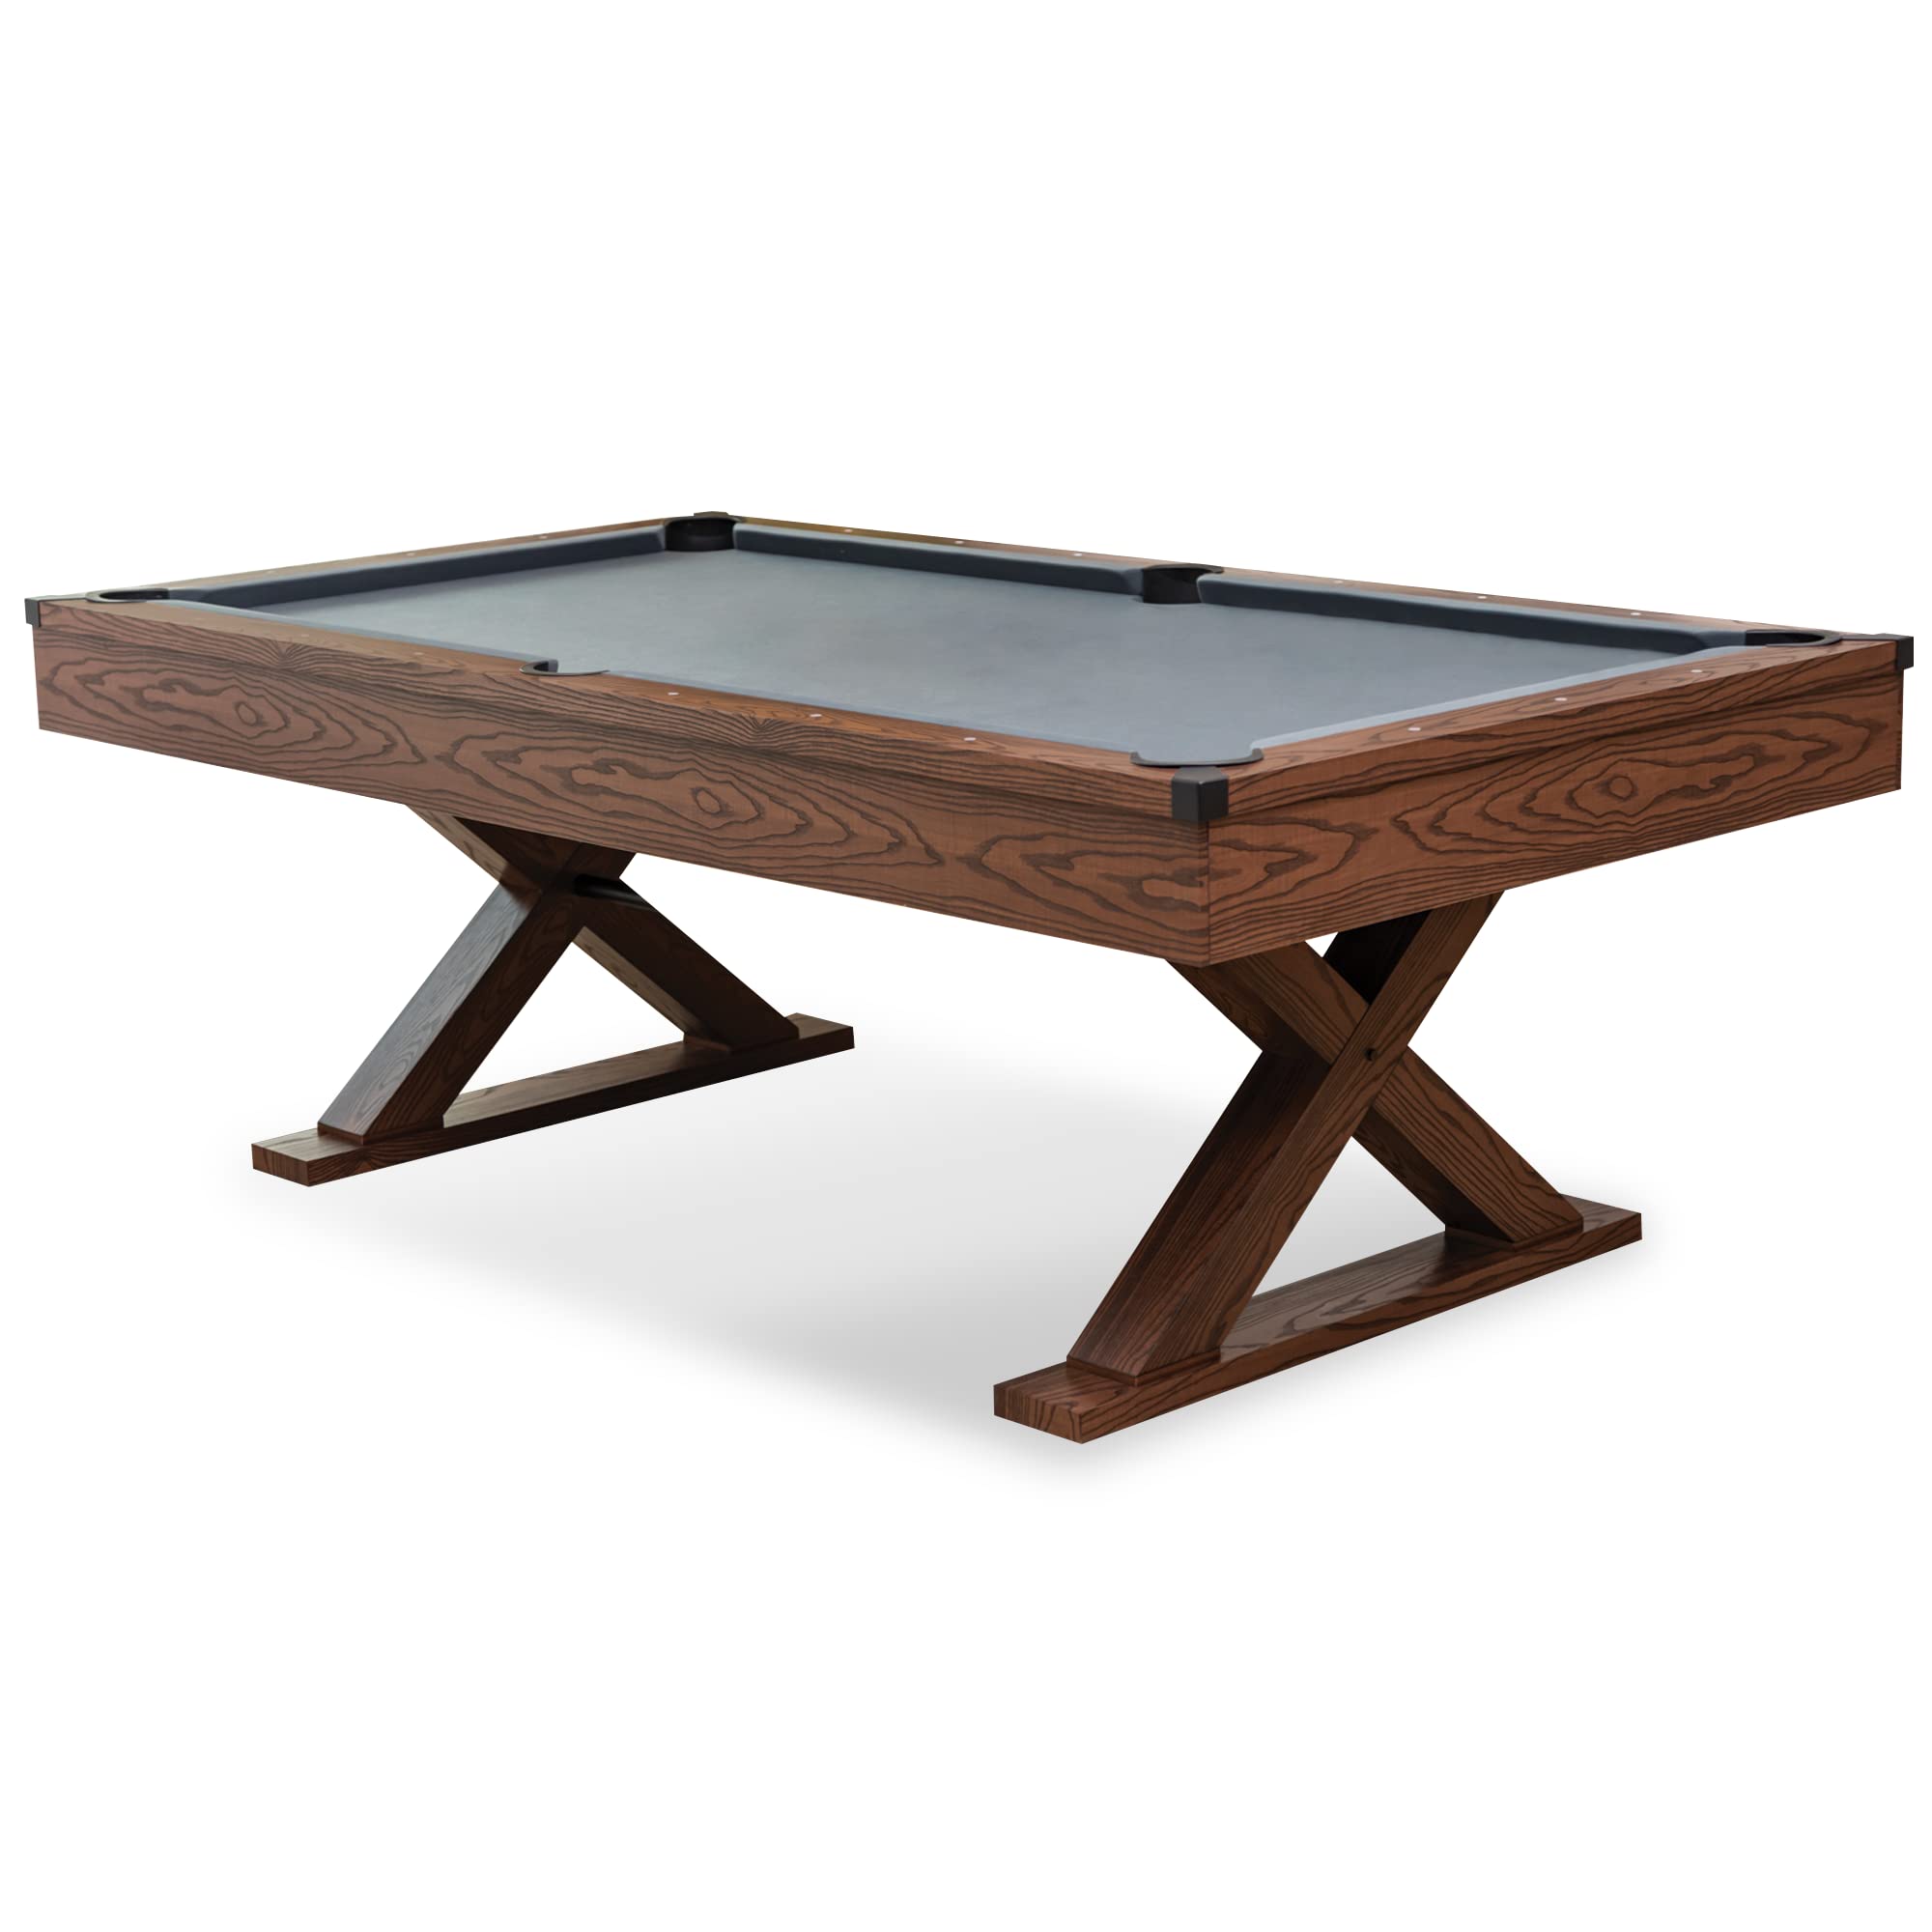 87" EastPoint Sports Dunhill Billiard Pool Table (Gray) $499 + Free Shipping